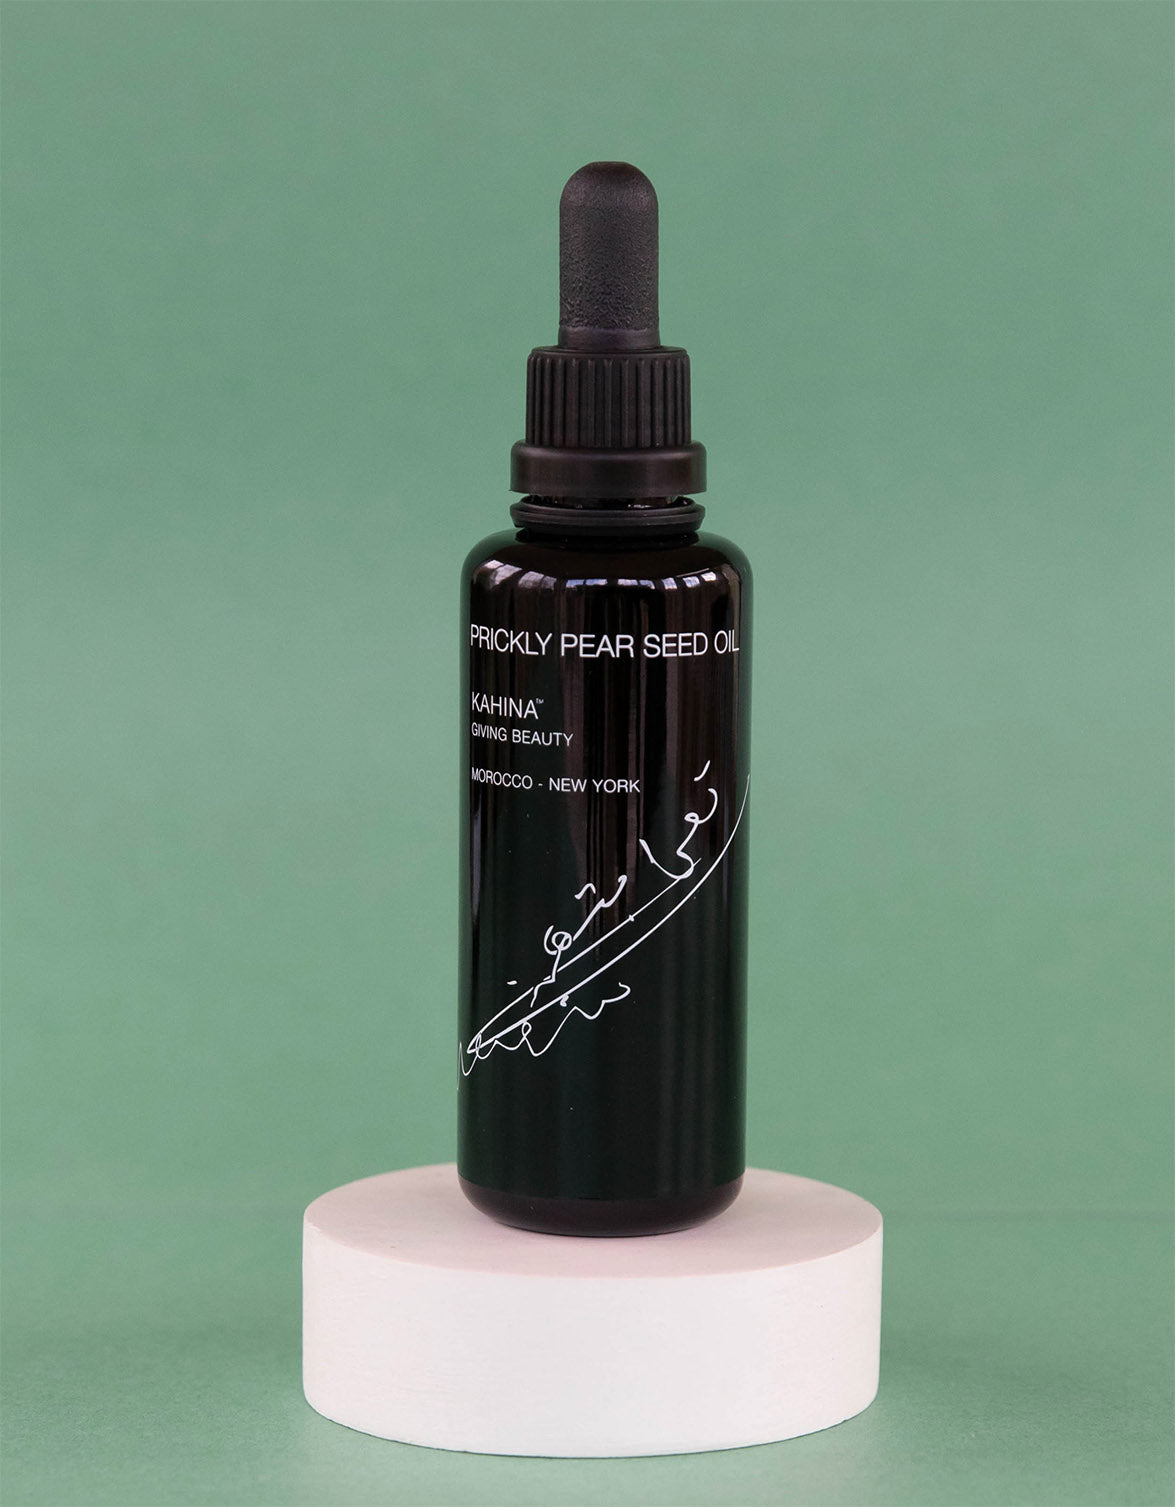 Our Prickly Pear Seed Oil Looks Better Than Ever – Kahina Giving Beauty